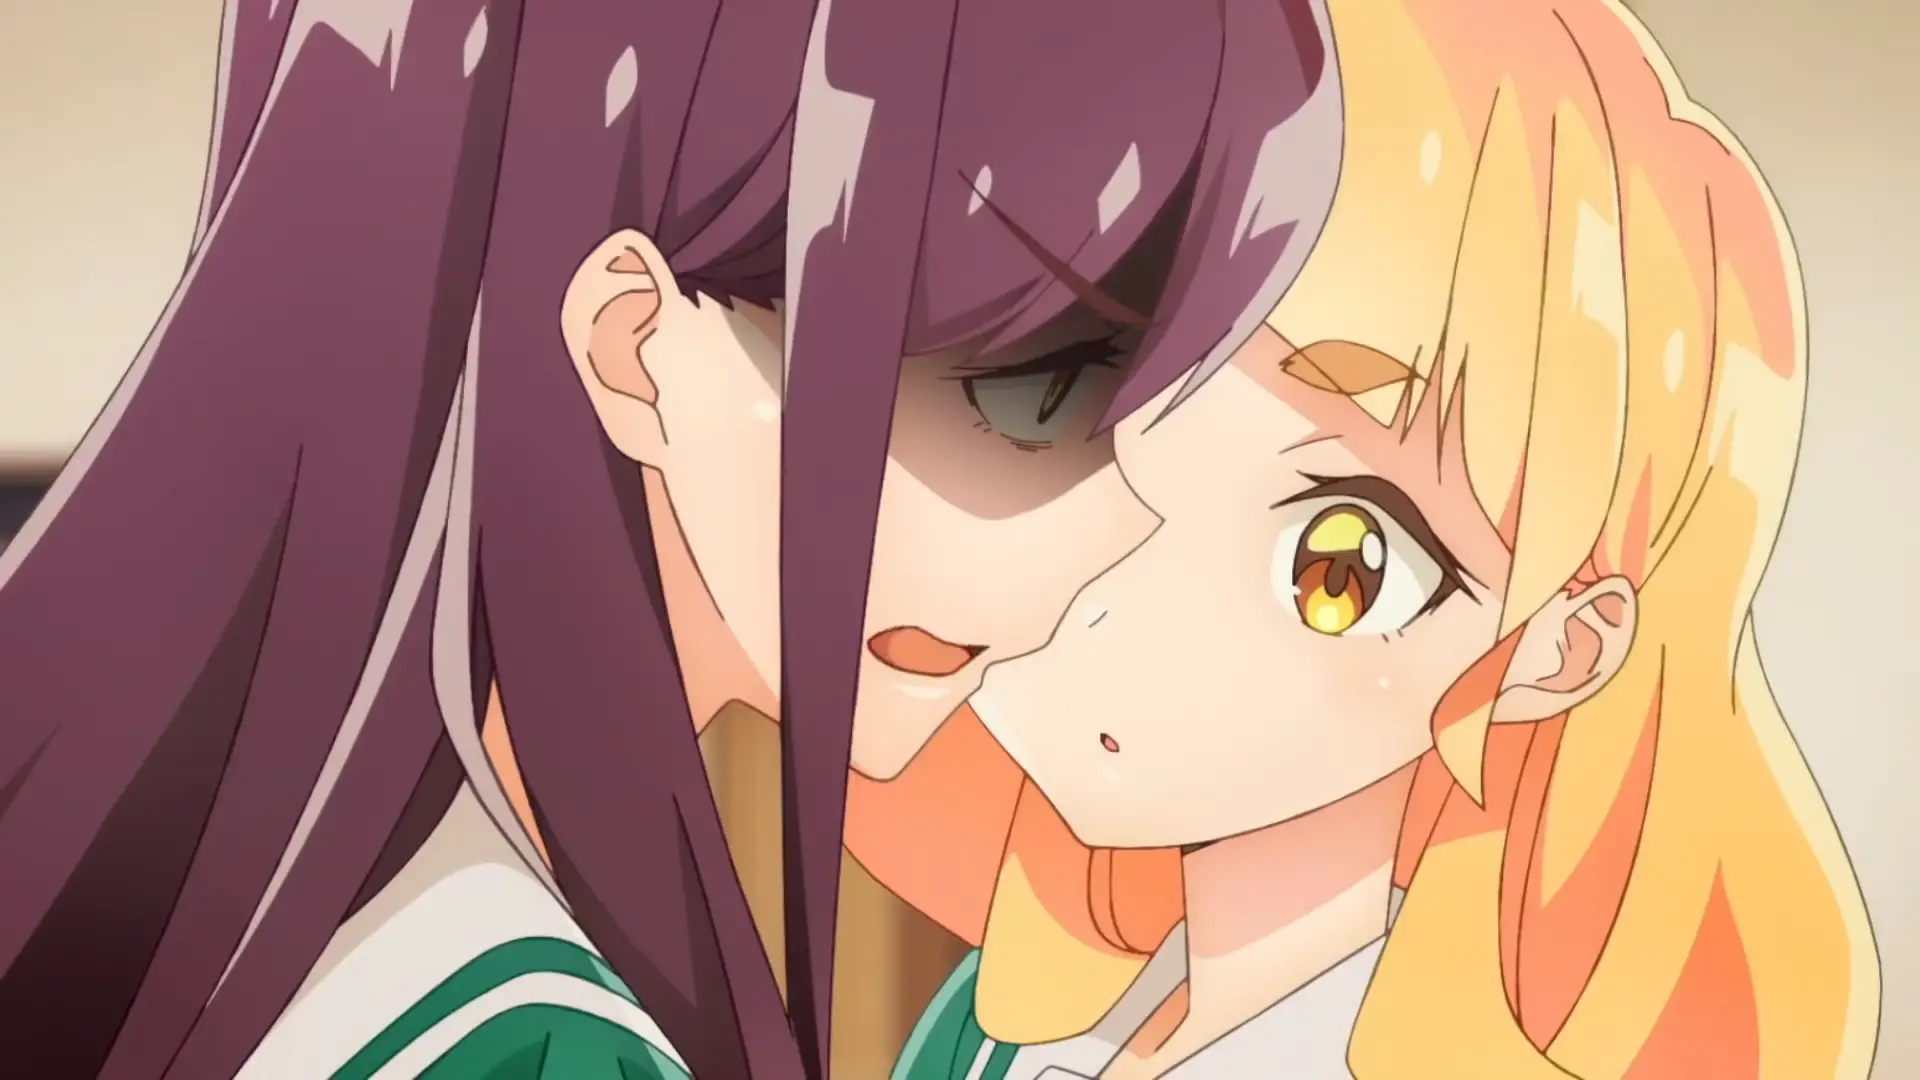 Yuri is my Job! yet another queer anime!